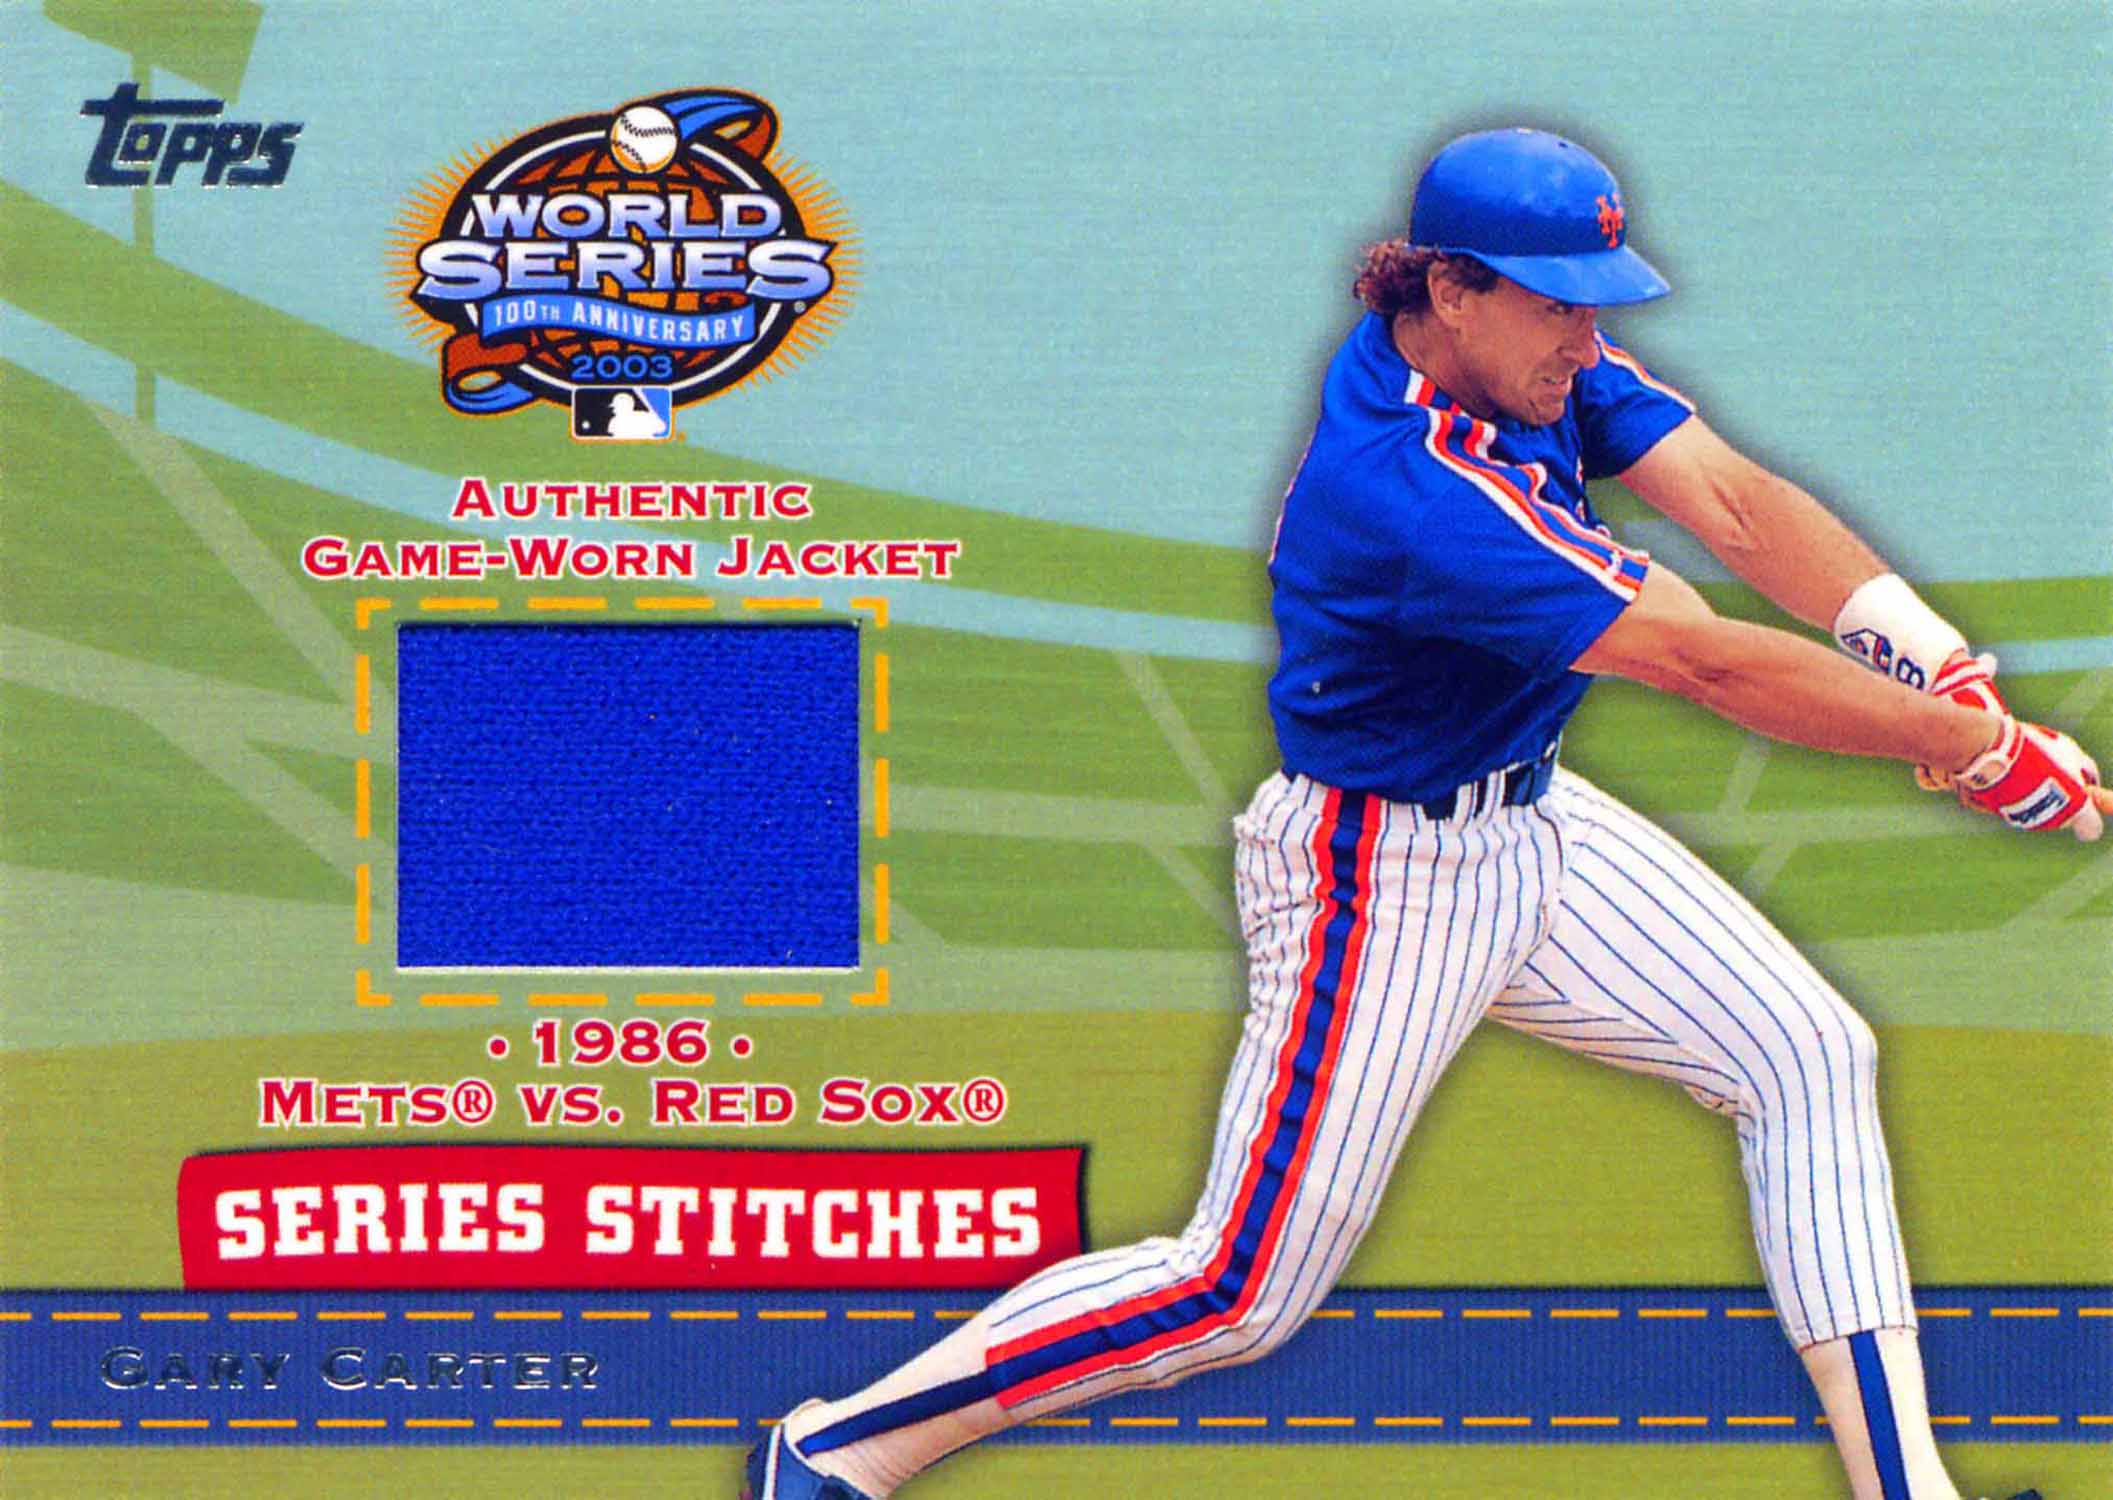 2004 Topps Series Stitches Relics Jacket